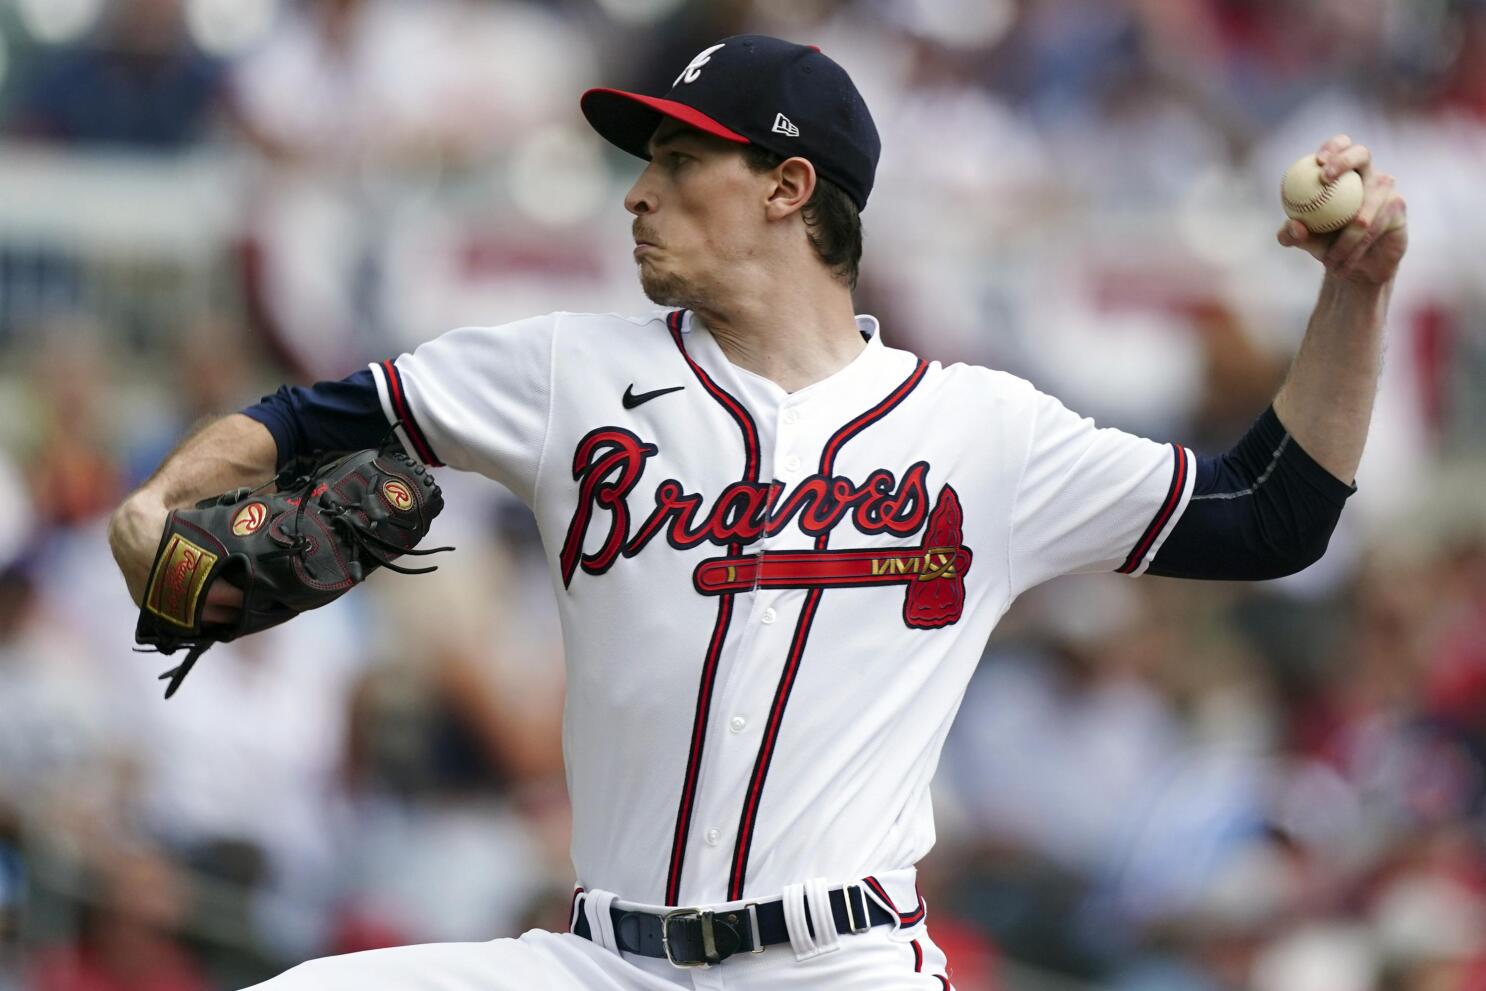 Braves preview: Max Fried starts as Atlanta goes for series win vs